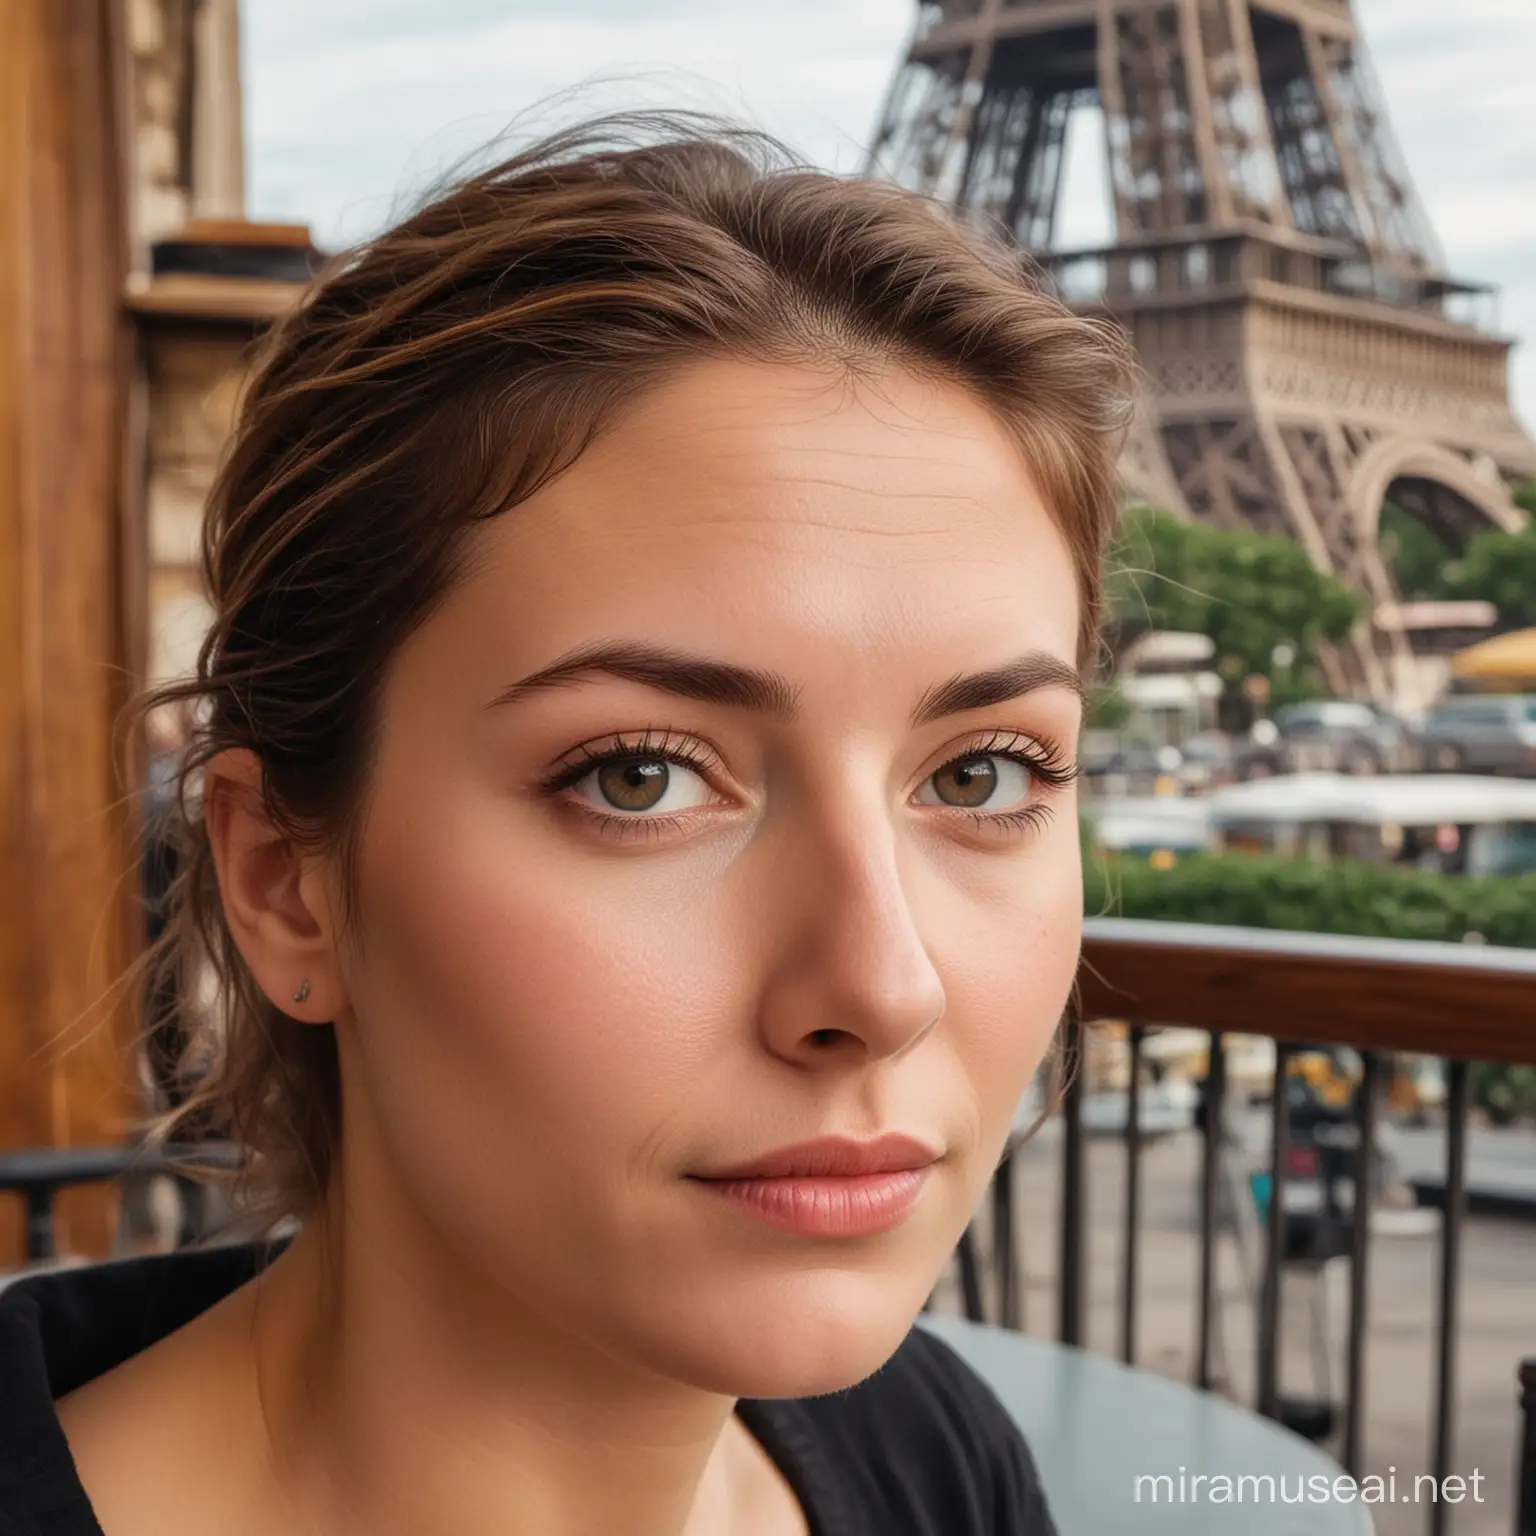 French Woman Enjoying Coffee with Eiffel Tower View